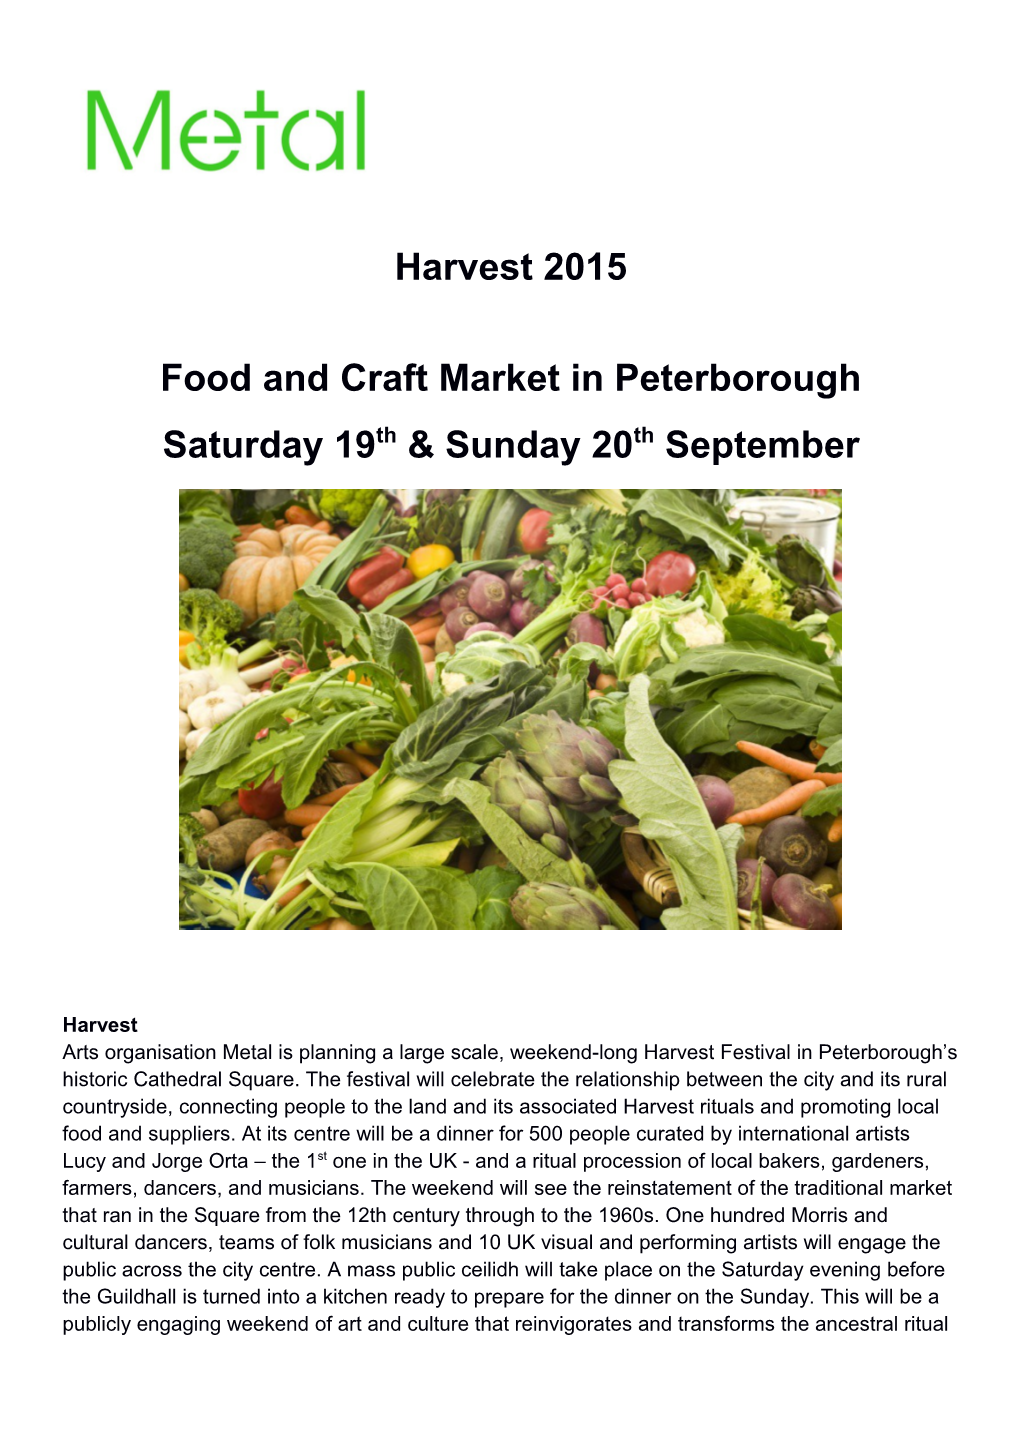 Food and Craft Market in Peterborough